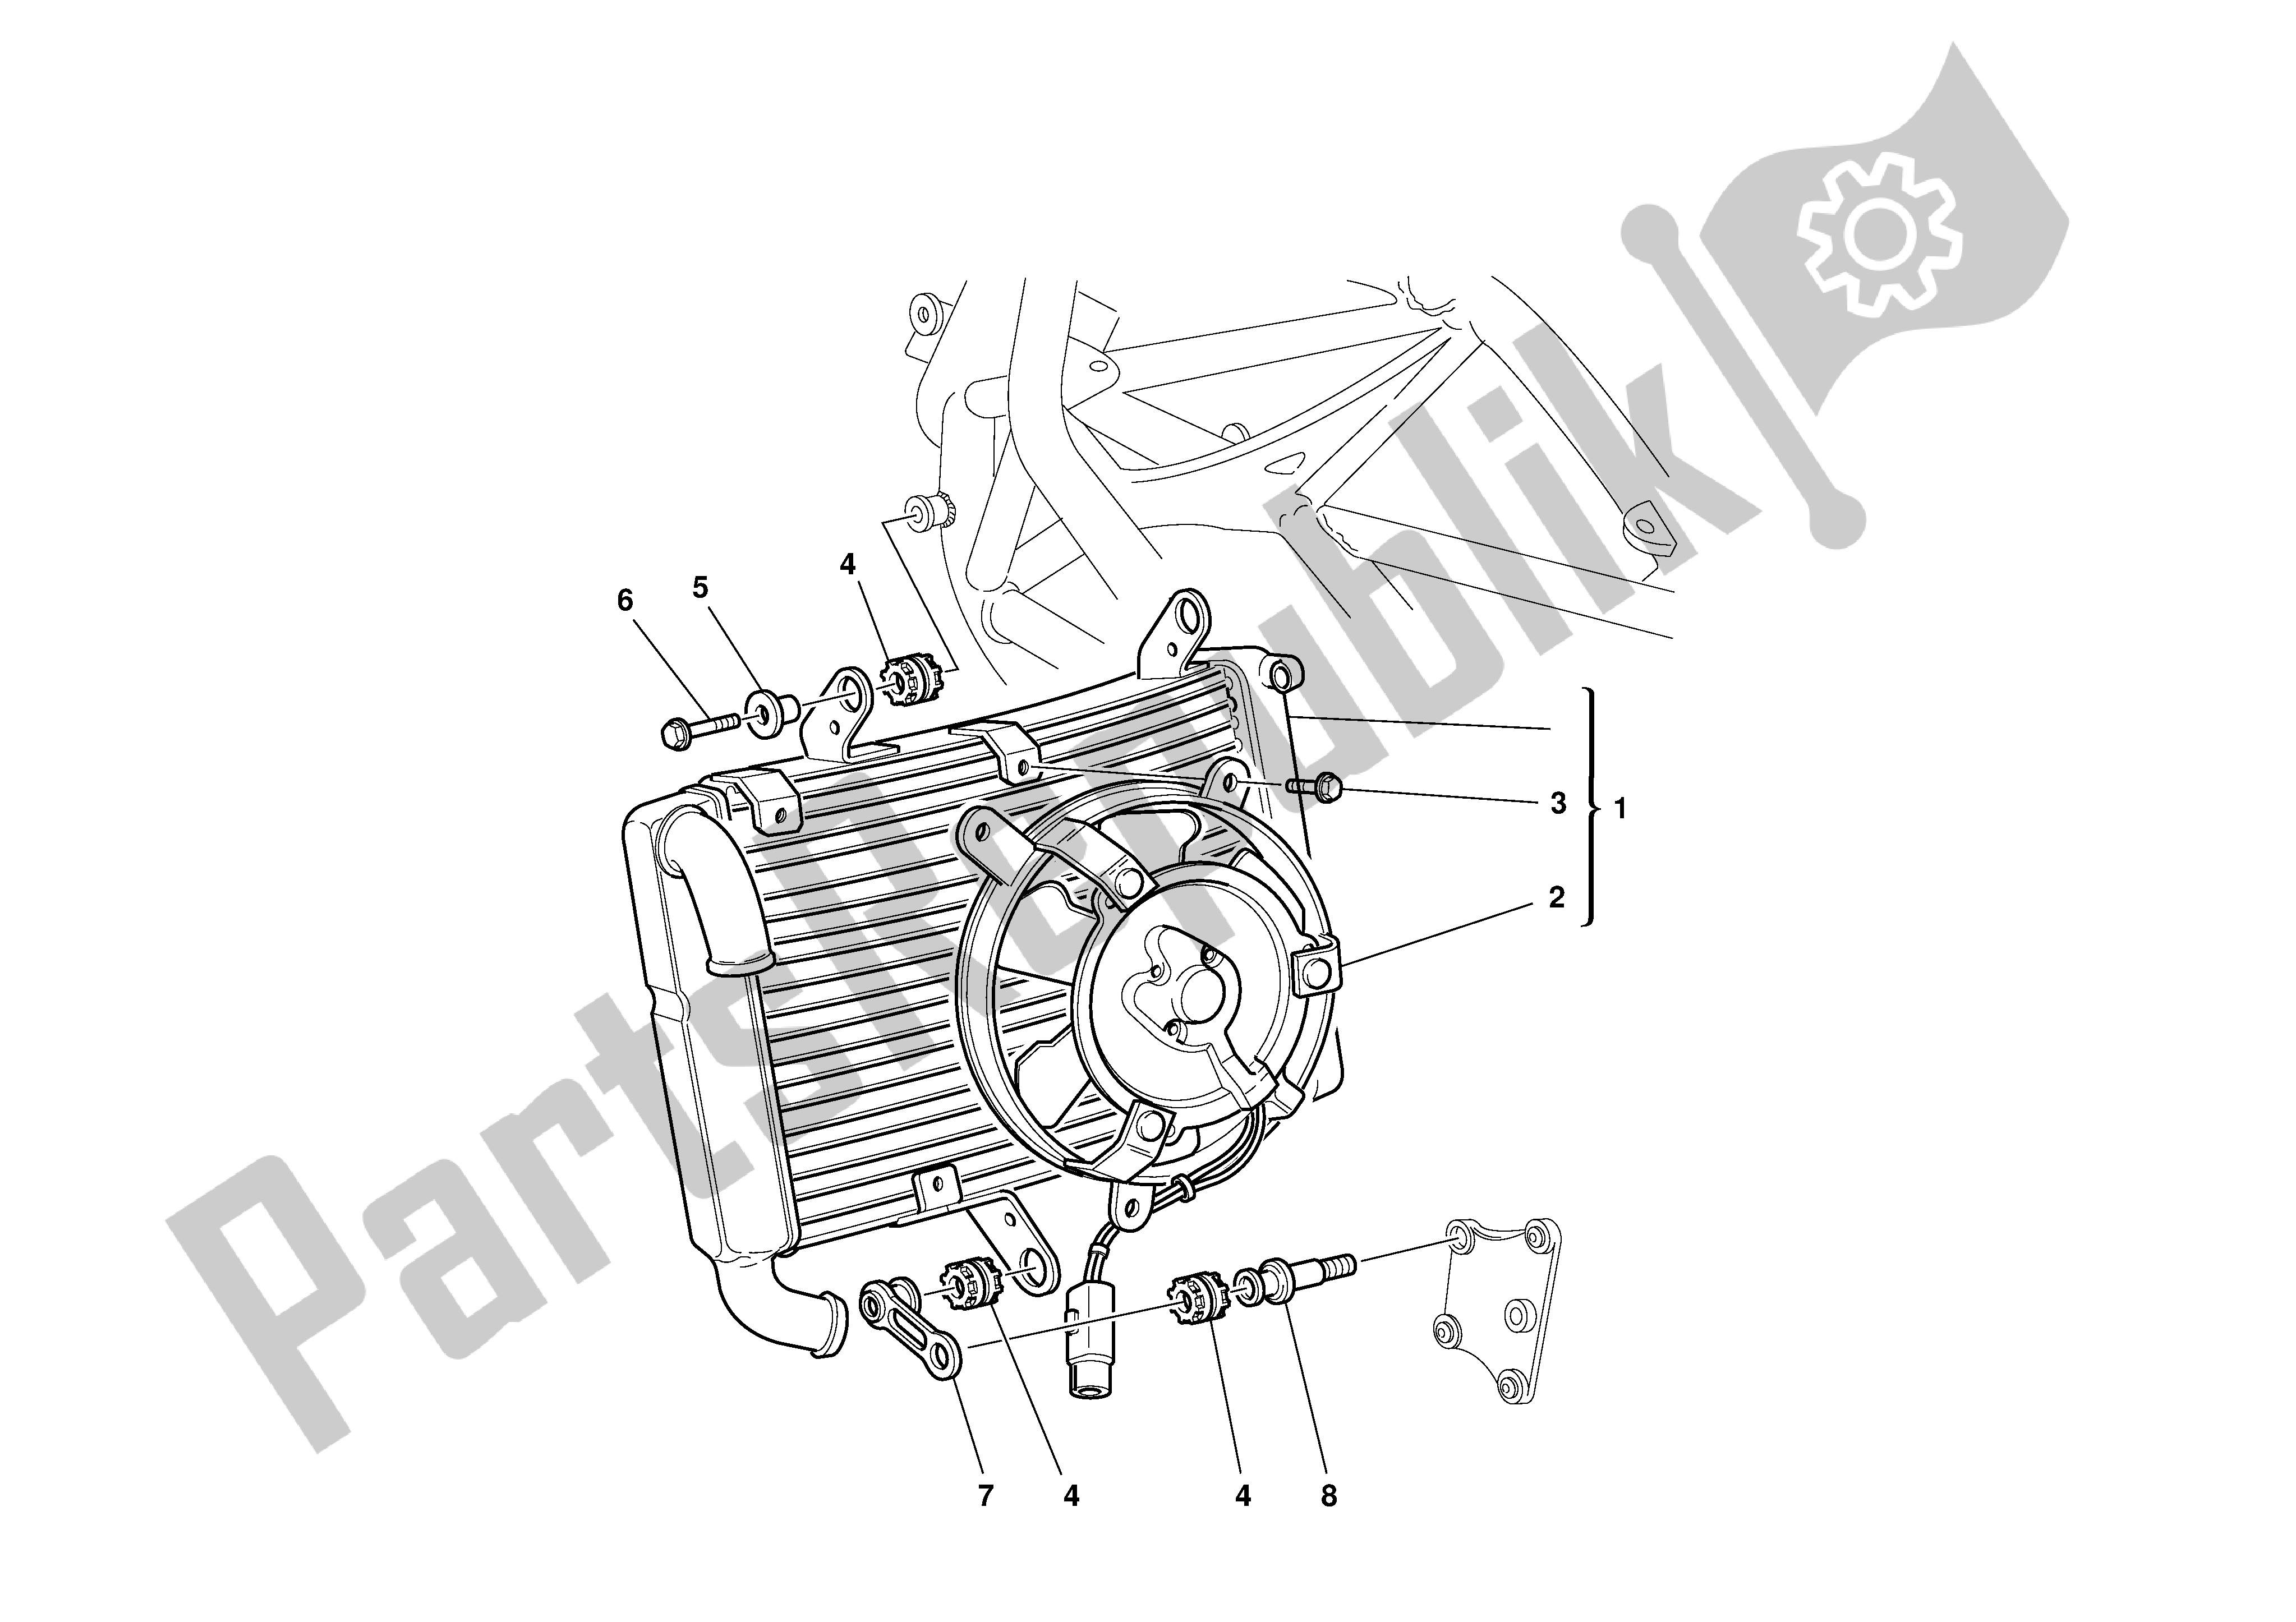 All parts for the Water Radiator Assy of the Ducati 748 2001